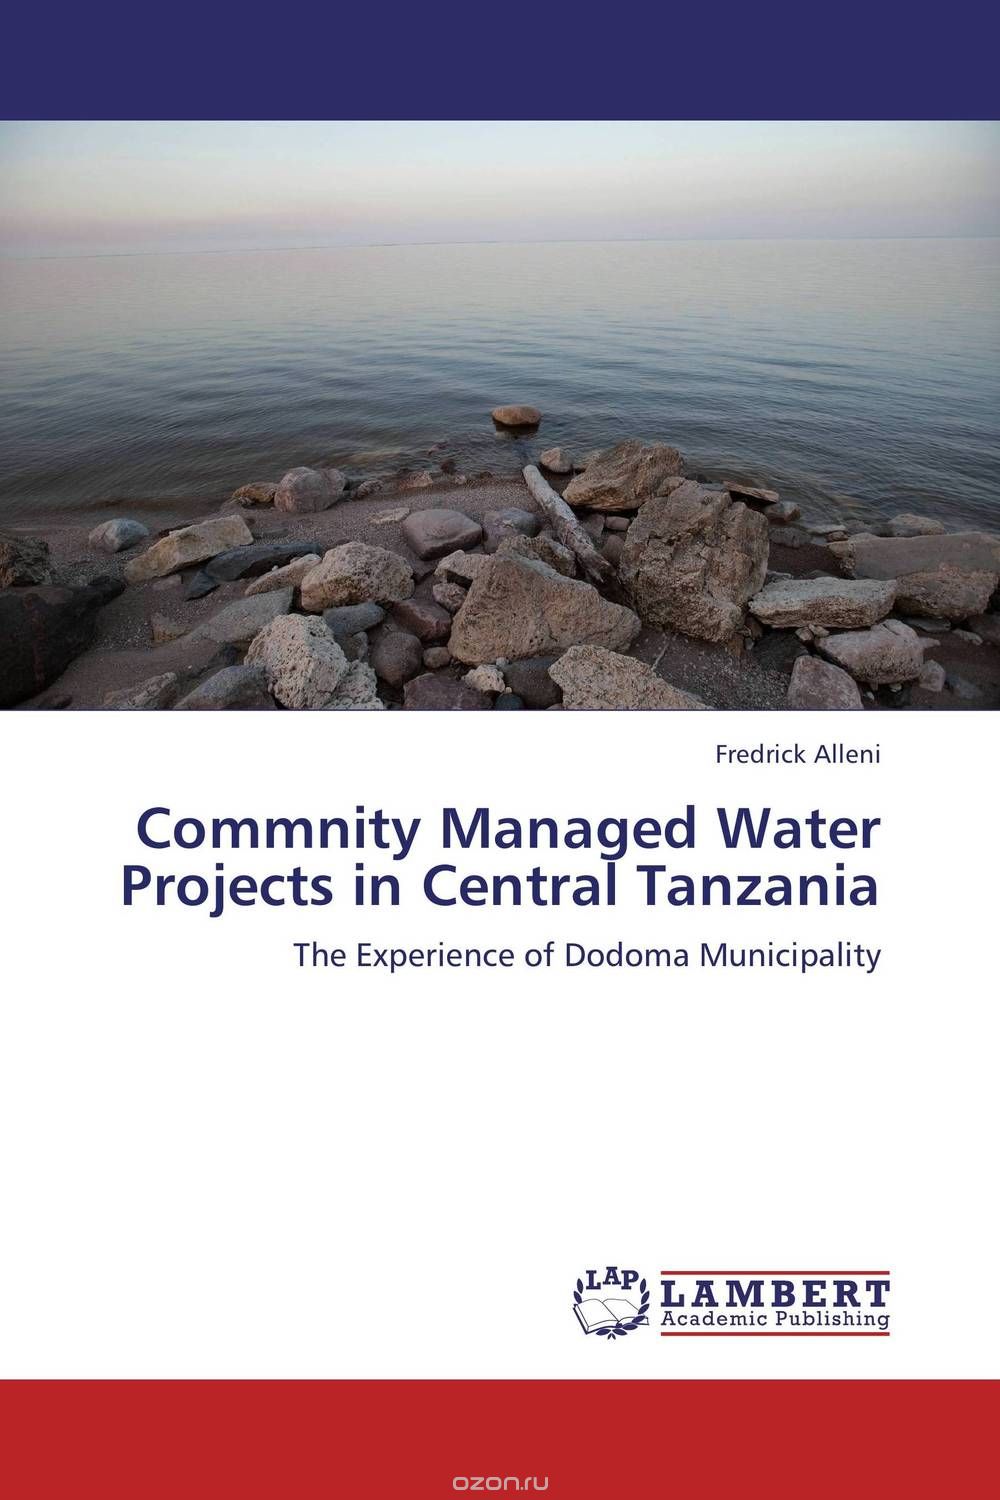 Commnity Managed Water Projects in Central Tanzania